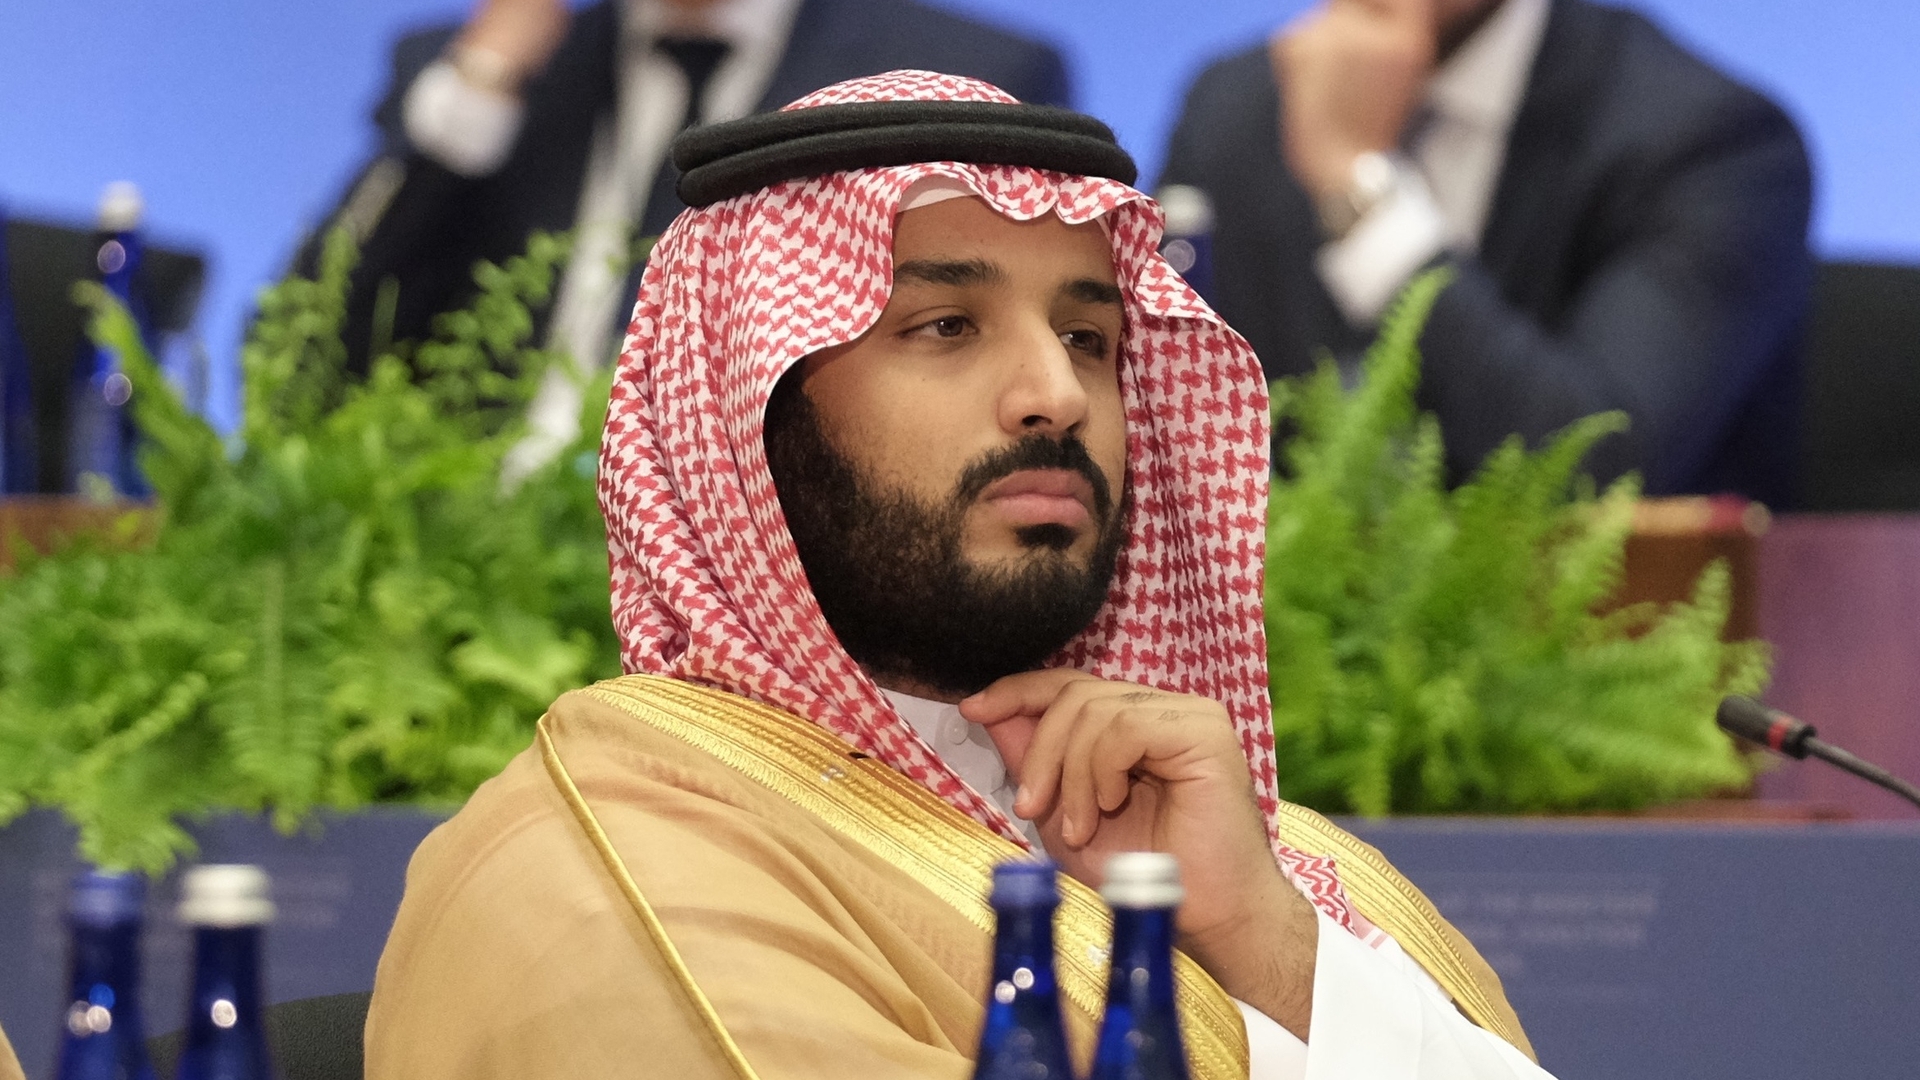 Deputy_Crown_Prince_Mohammad_Bin_Salman_bin_Abdulaziz_Al-Saud_Participates_in_the_Counter-ISIL_Ministerial_Plenary_Session_-_Flickr_-_U.S._Department_of_State_(cropped)